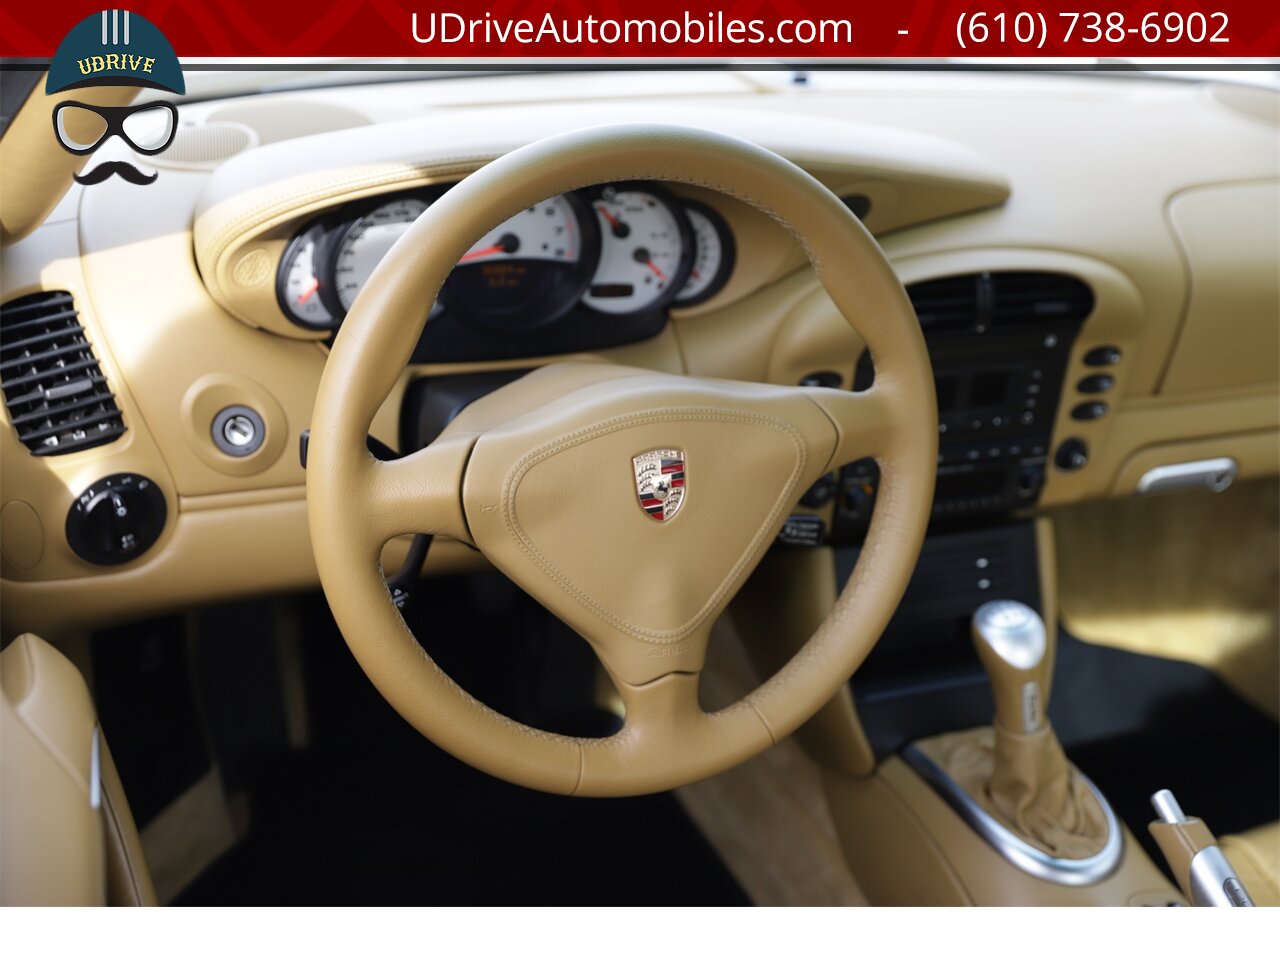 2003 Porsche 911 Turbo 996 6 Speed Carrara White Sport Seats  Detailed Service History - Photo 29 - West Chester, PA 19382